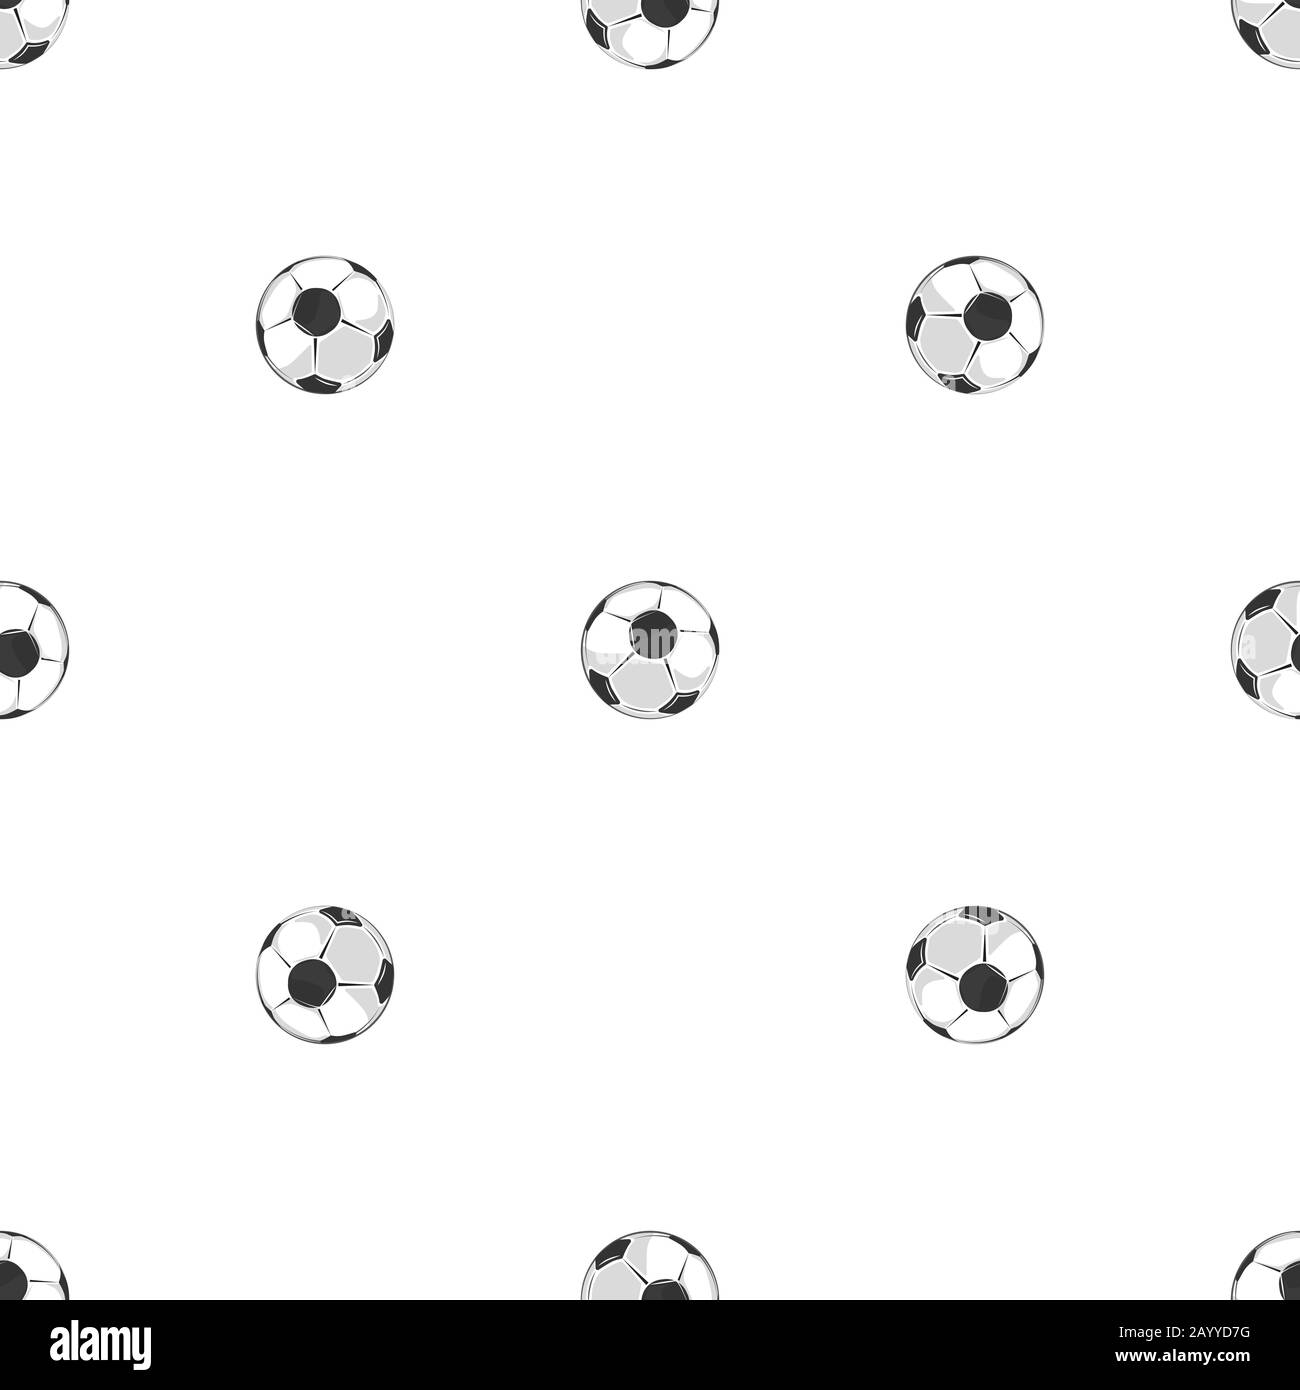 Soccer balls seamless pattern in black and white. Abstract background soccer game, vector illustration Stock Vector